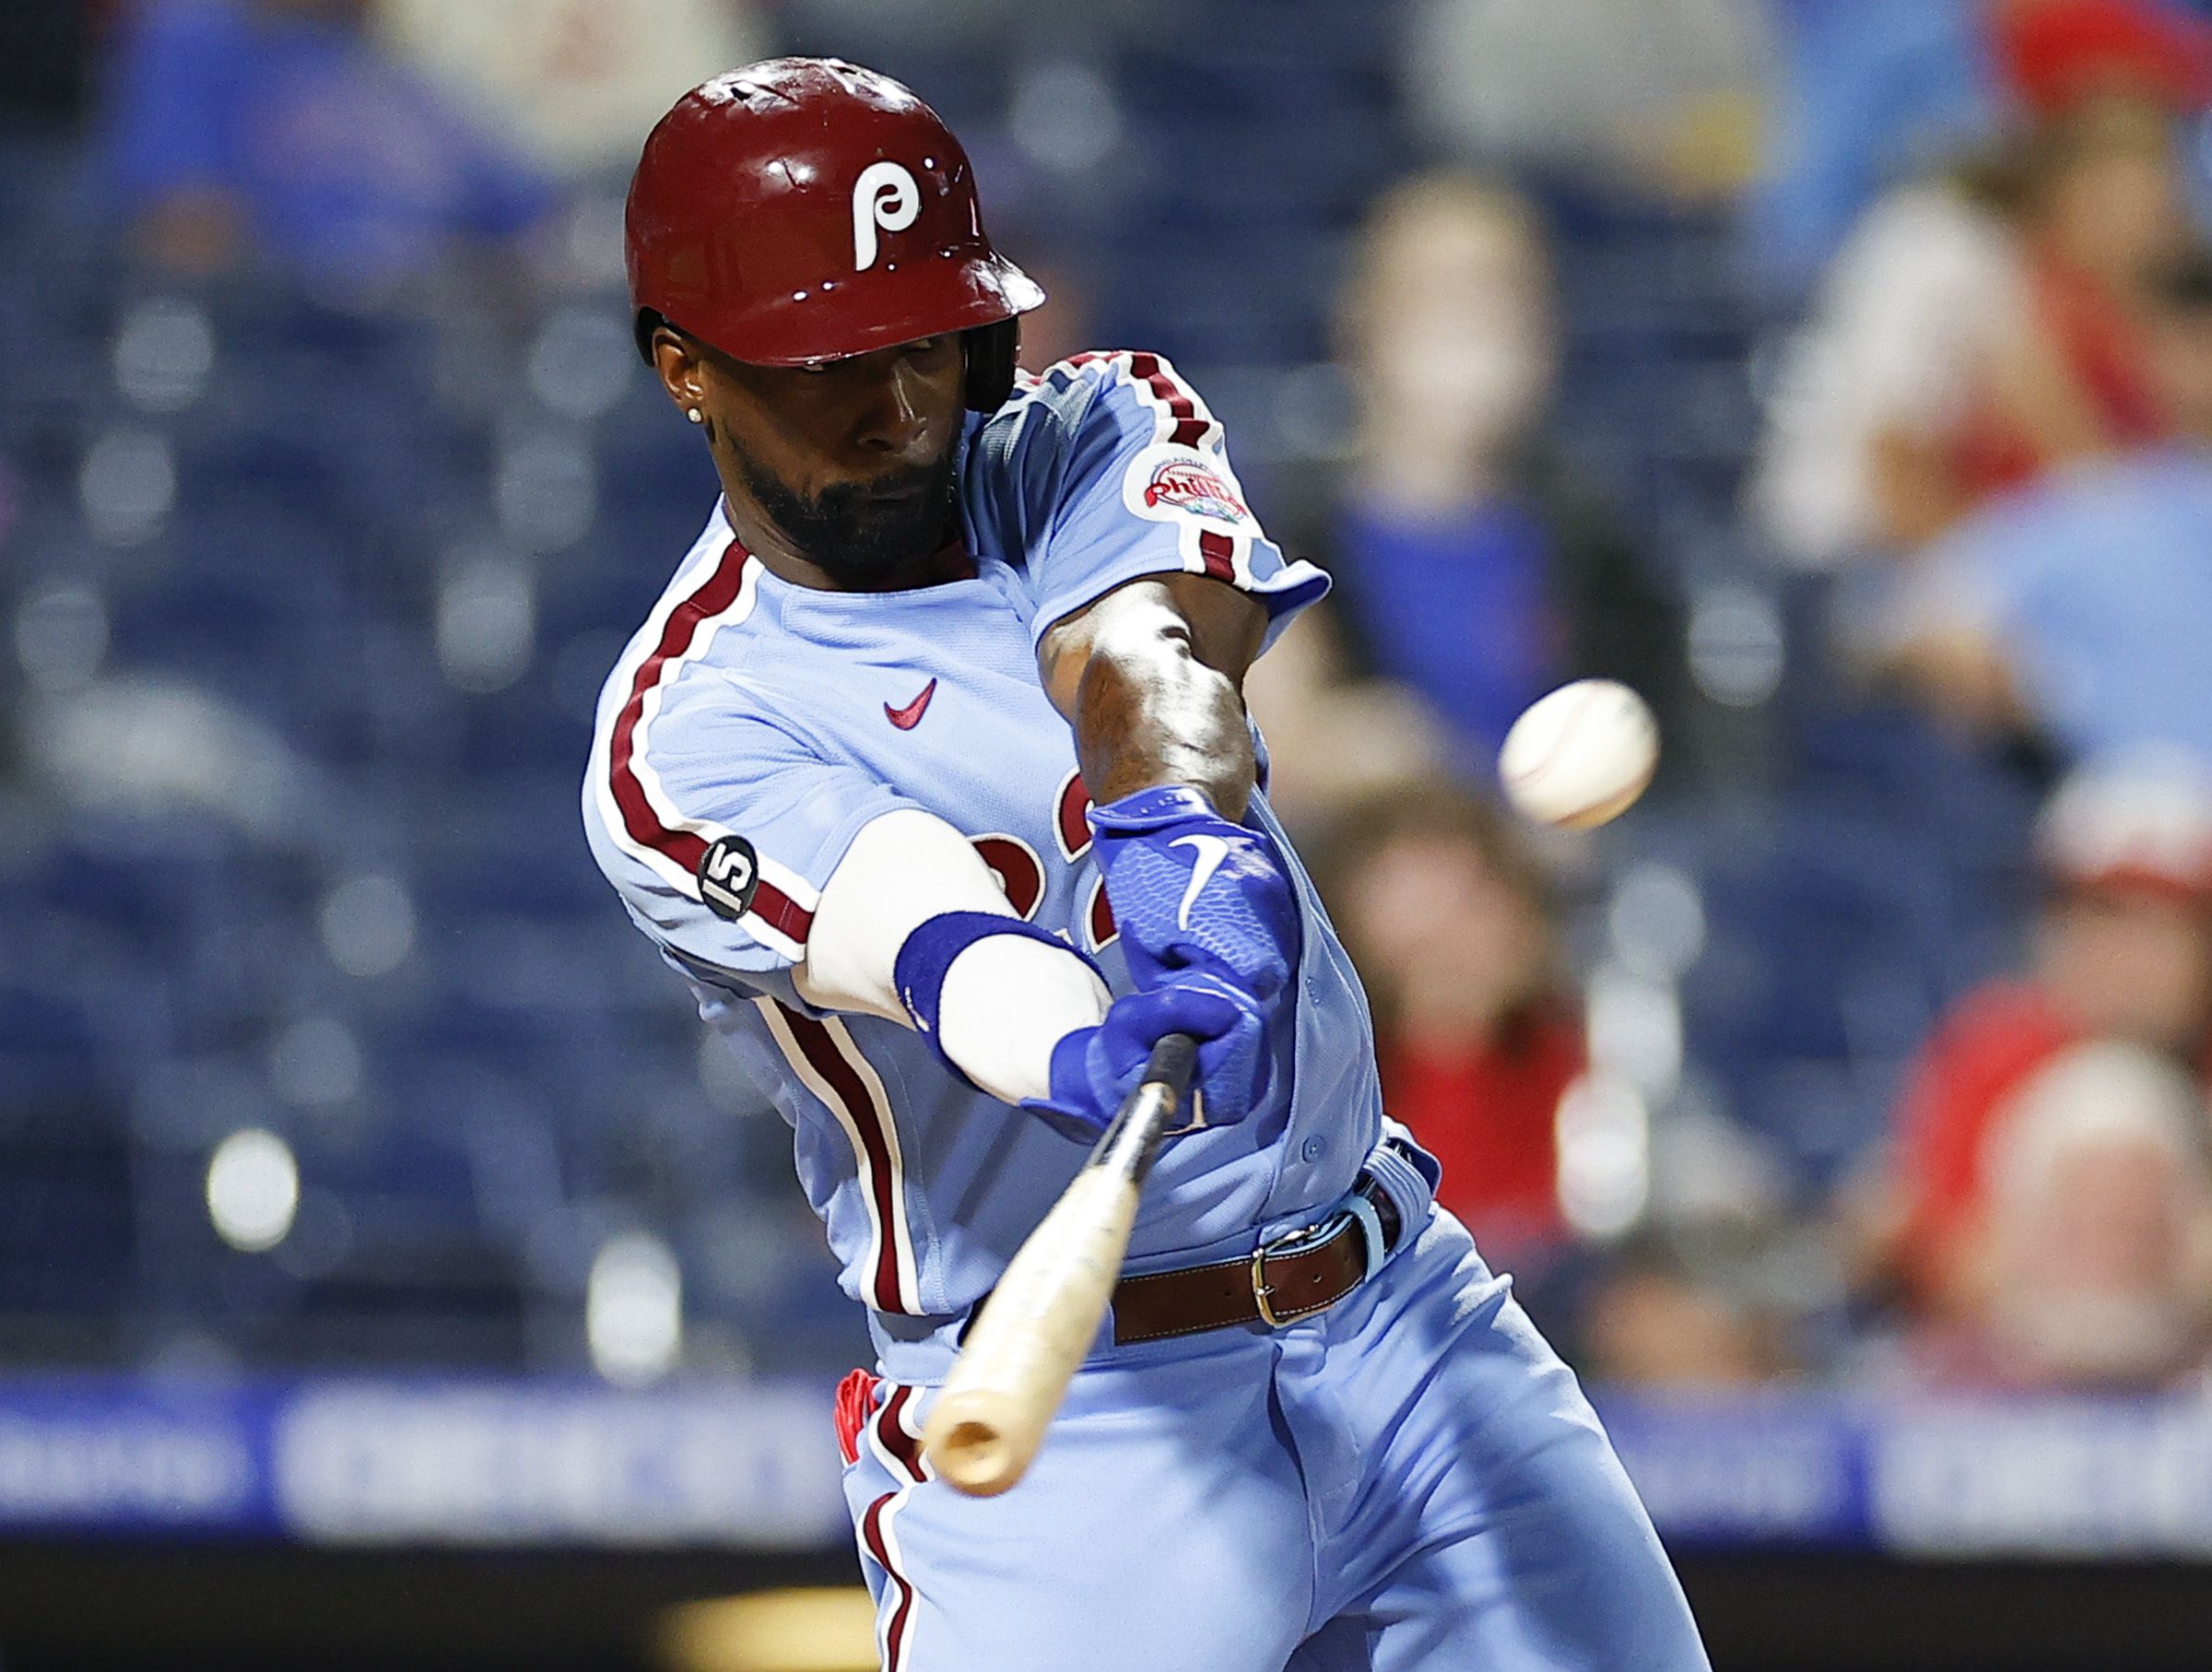 Bryce Harper sparks a 17-8 win over the Cubs as Phillies erase